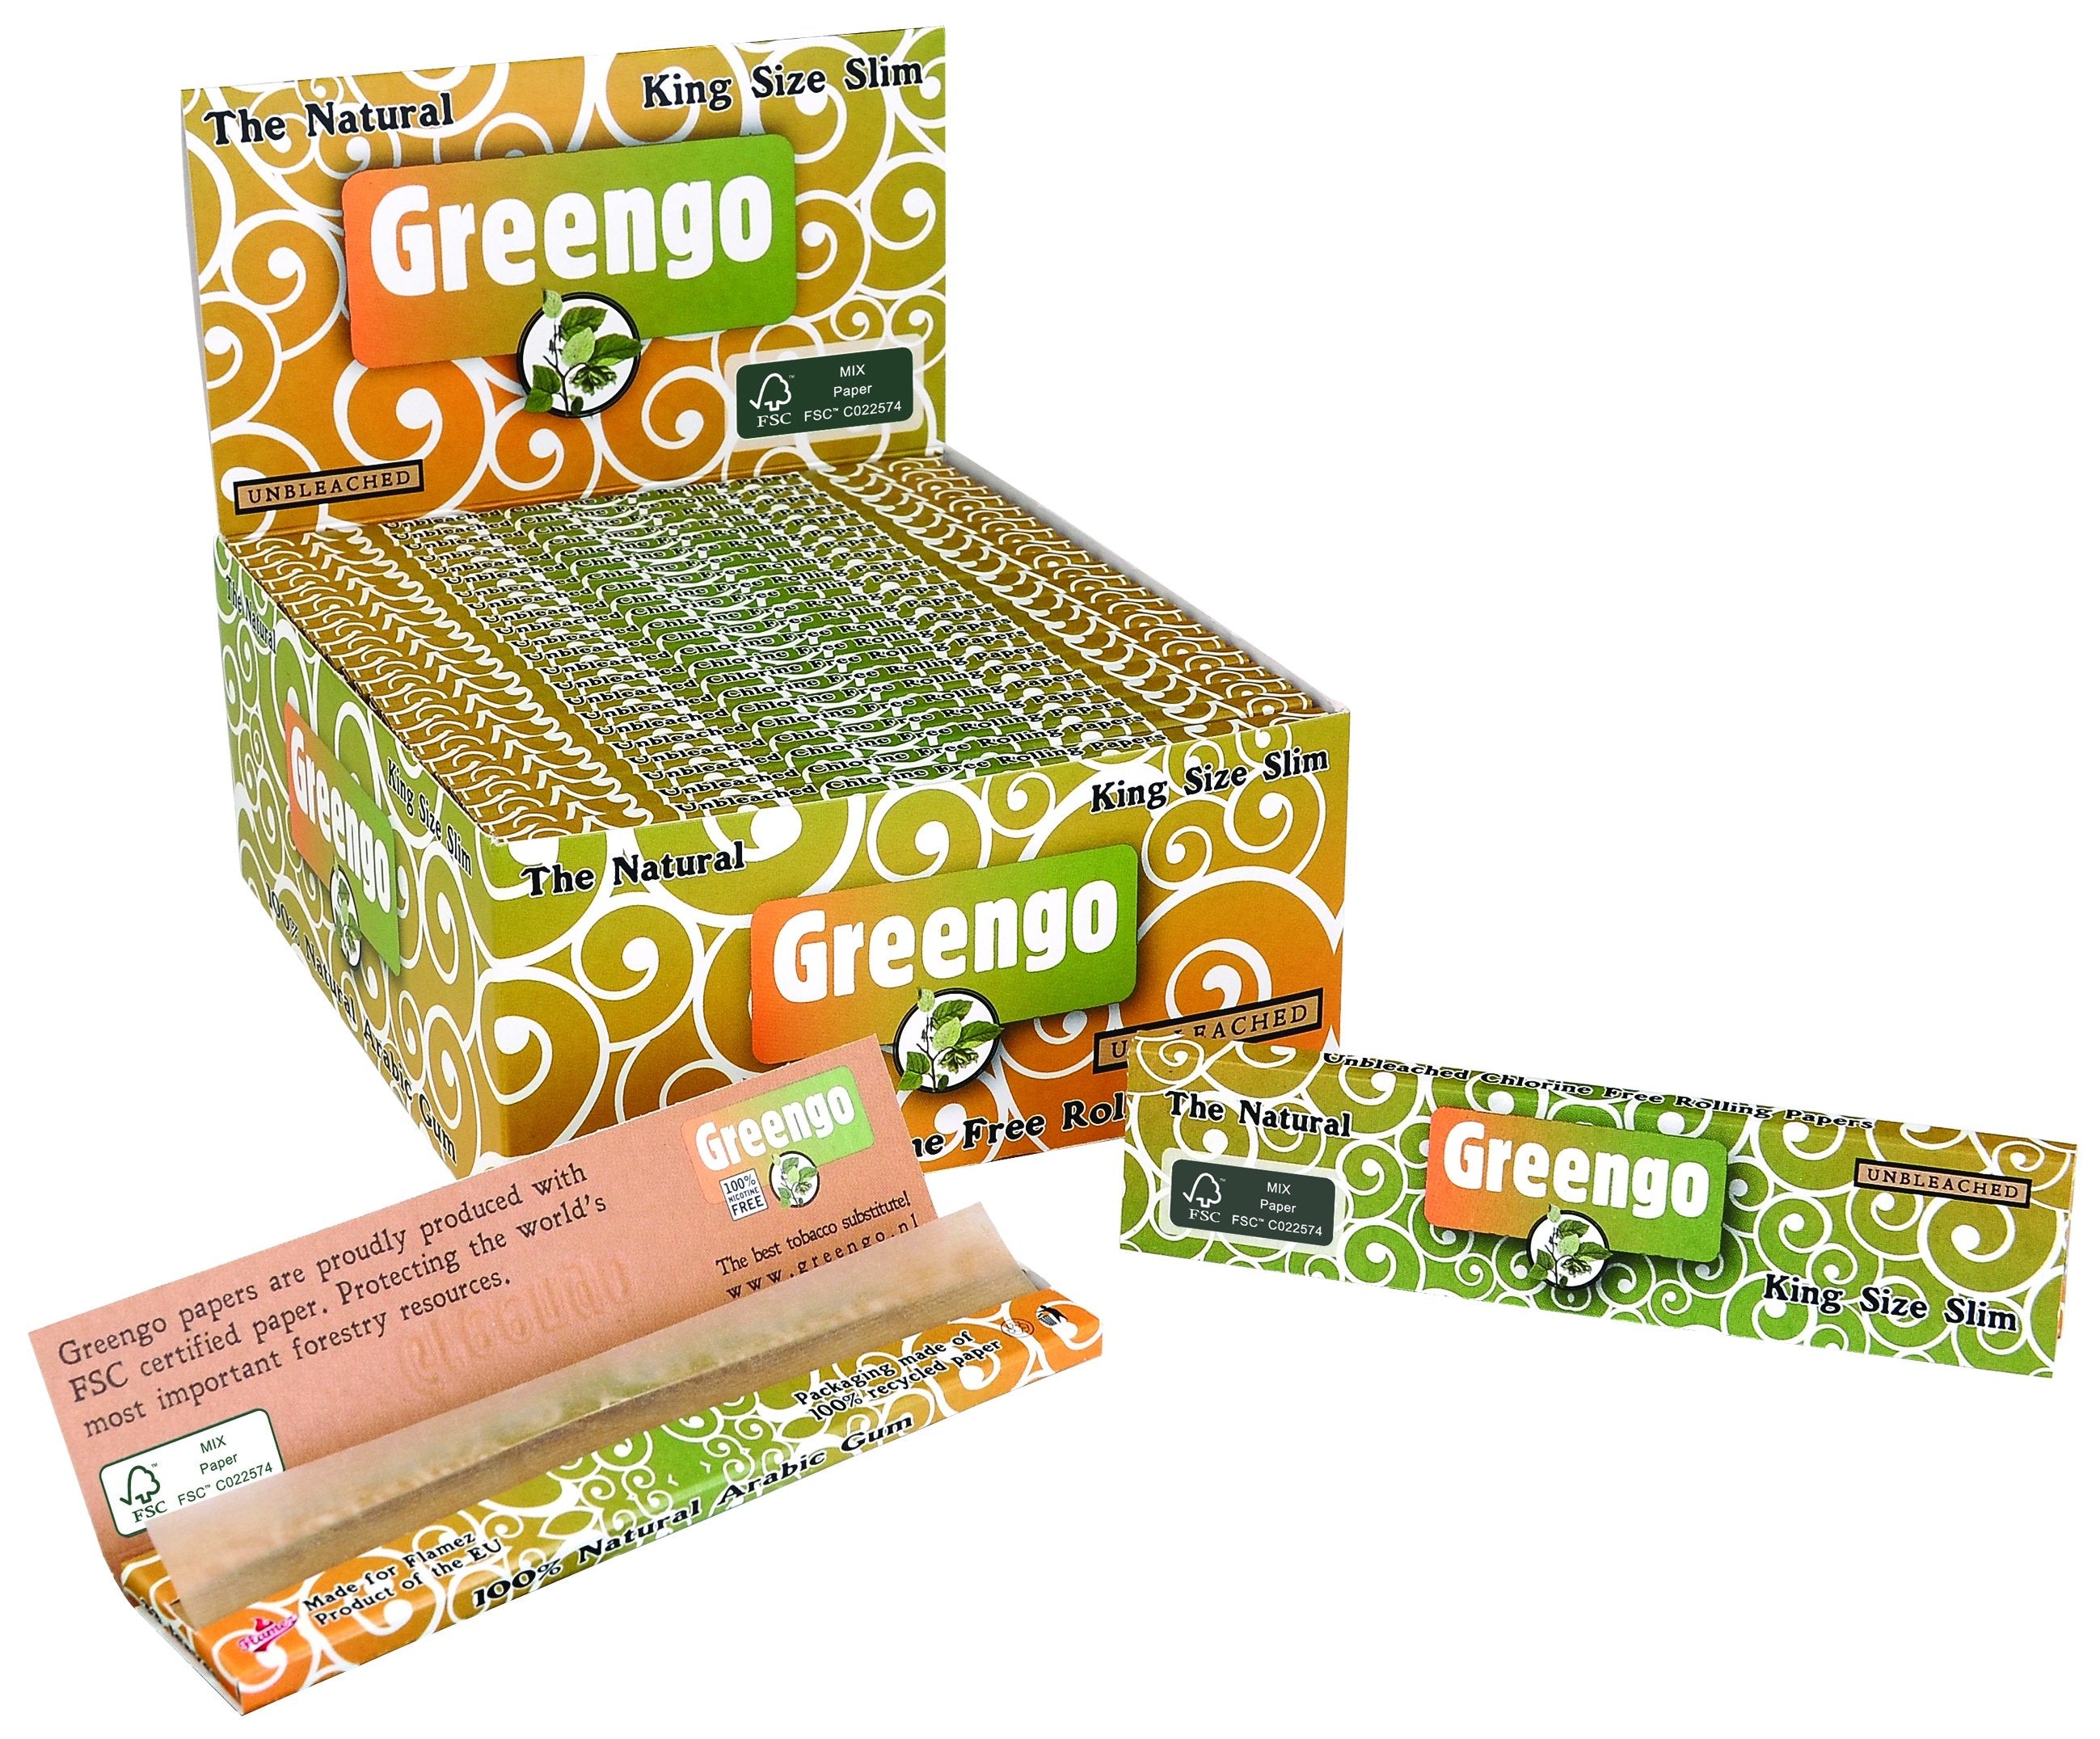 GREENGO 2 in 1 Kingslim Papers & Filter Tips